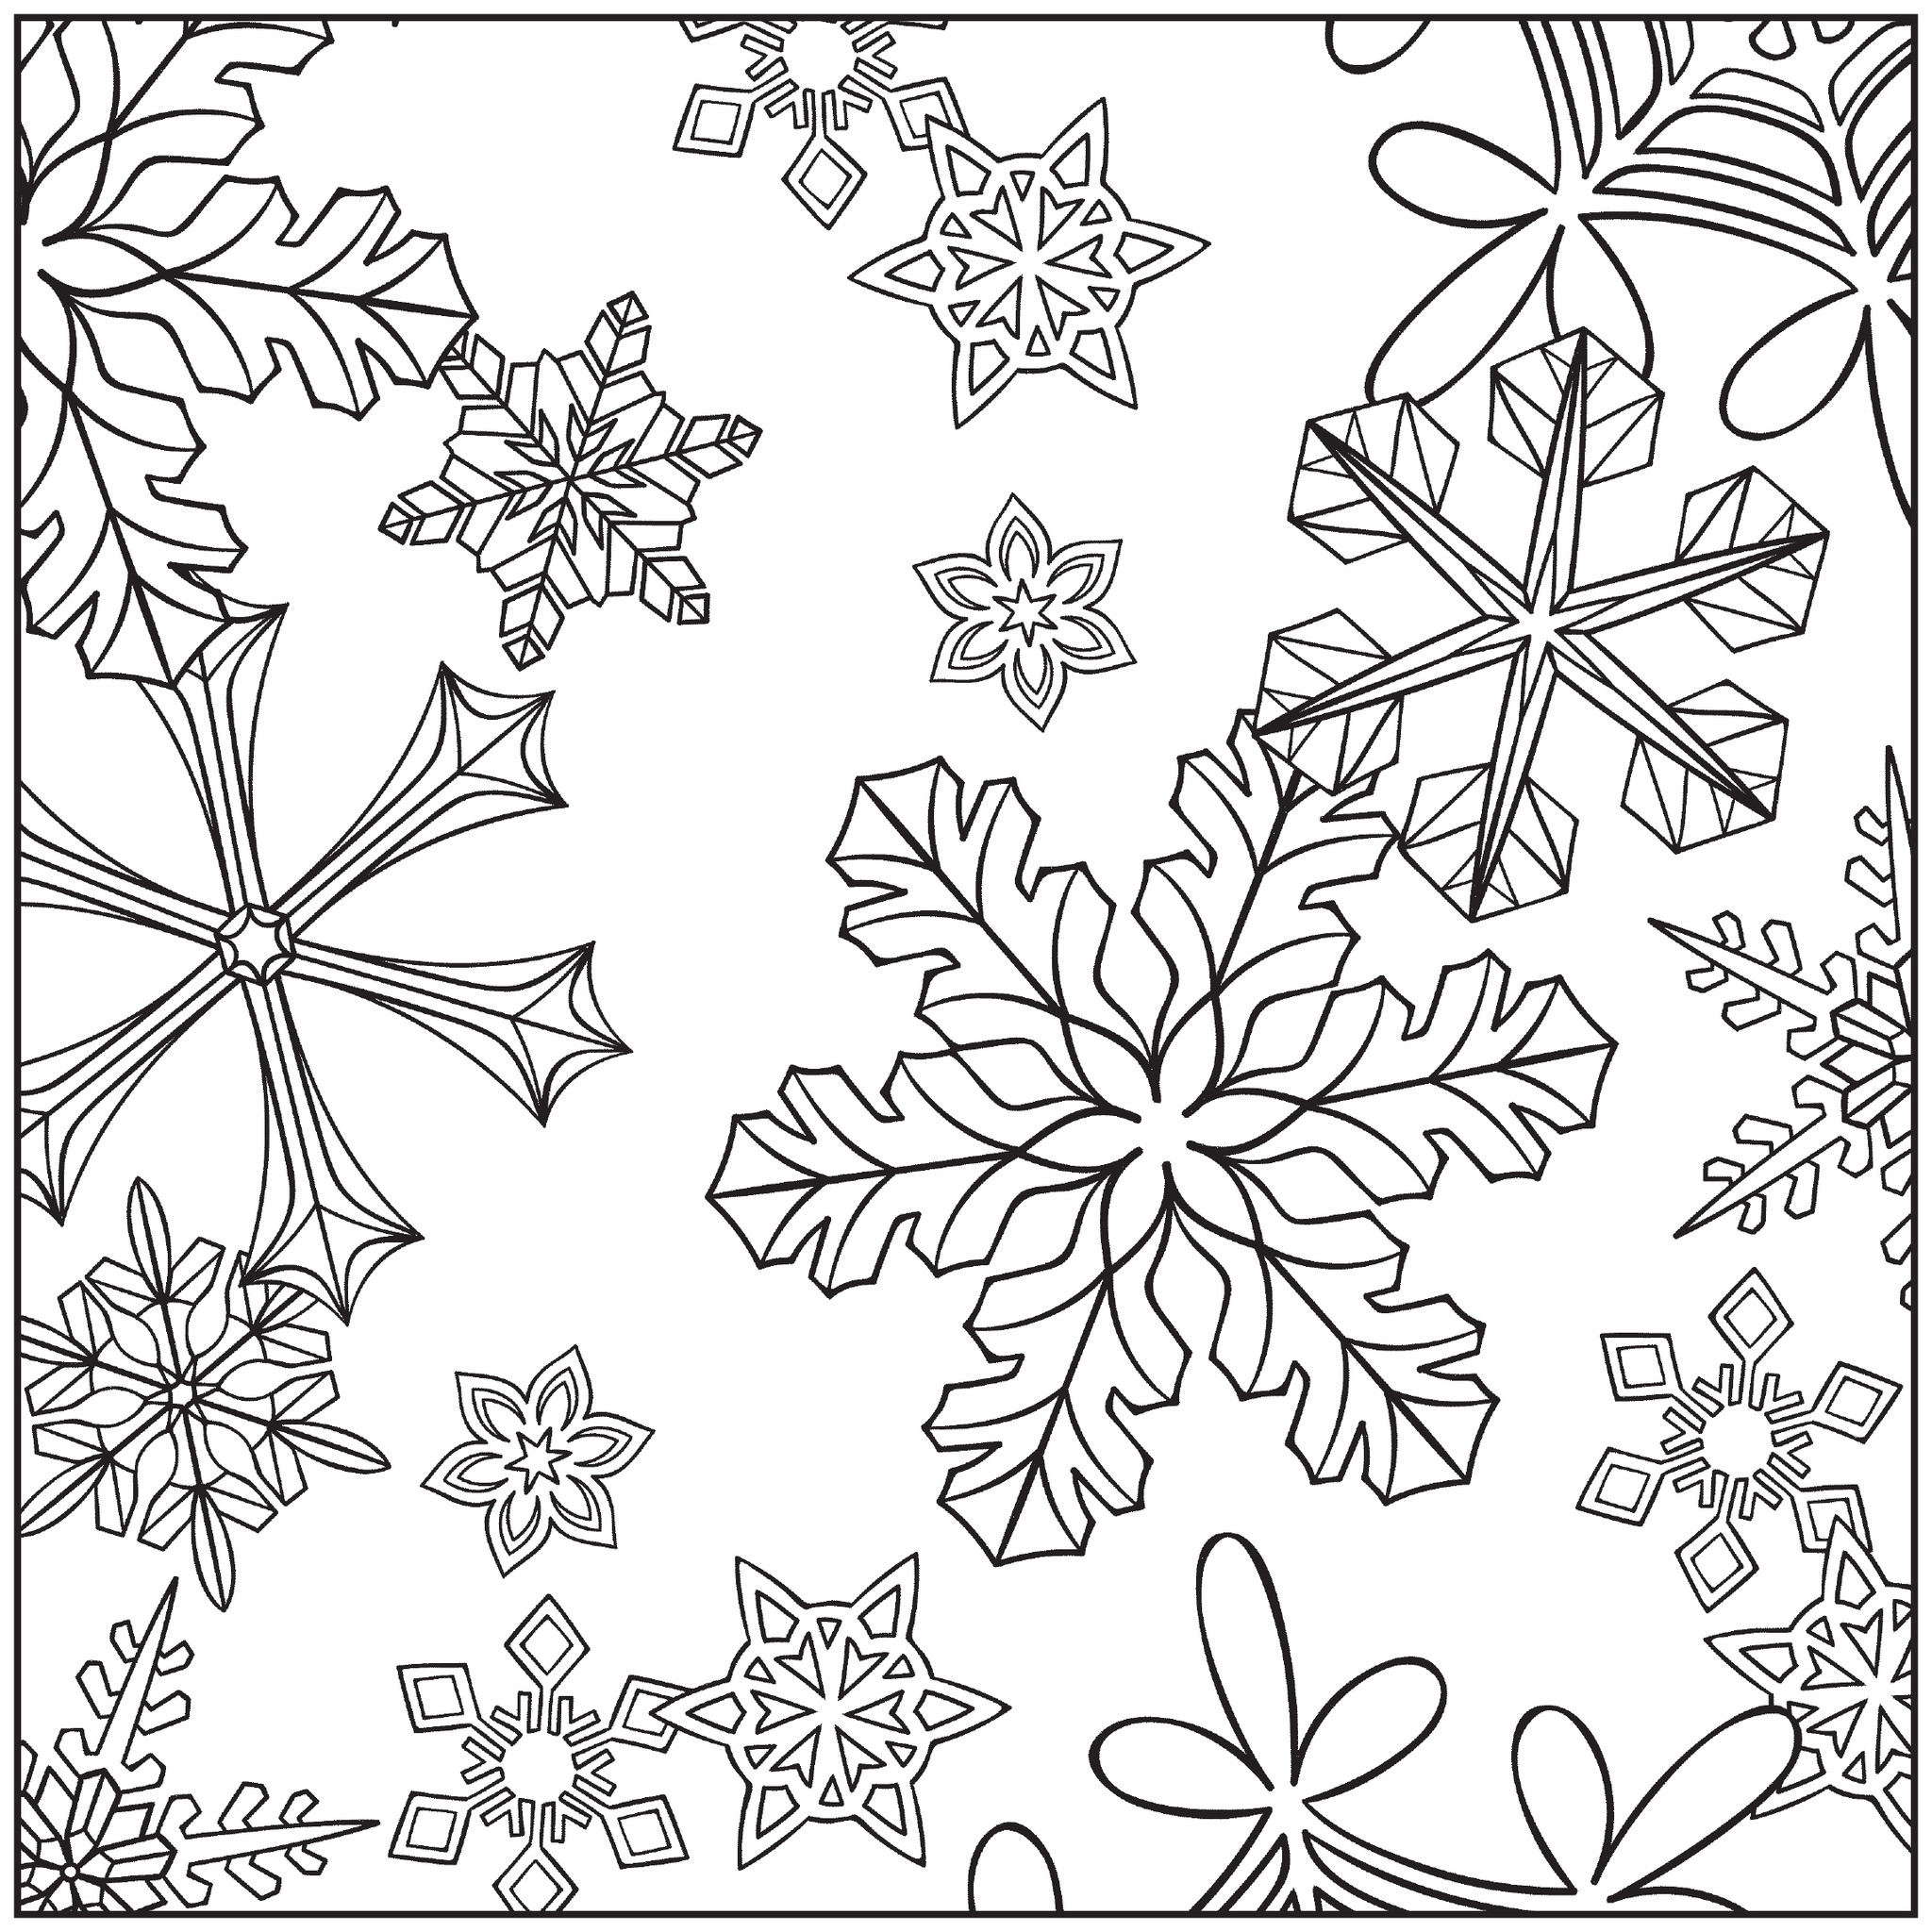 Printable Winter Wonderland Coloring Pages at Free